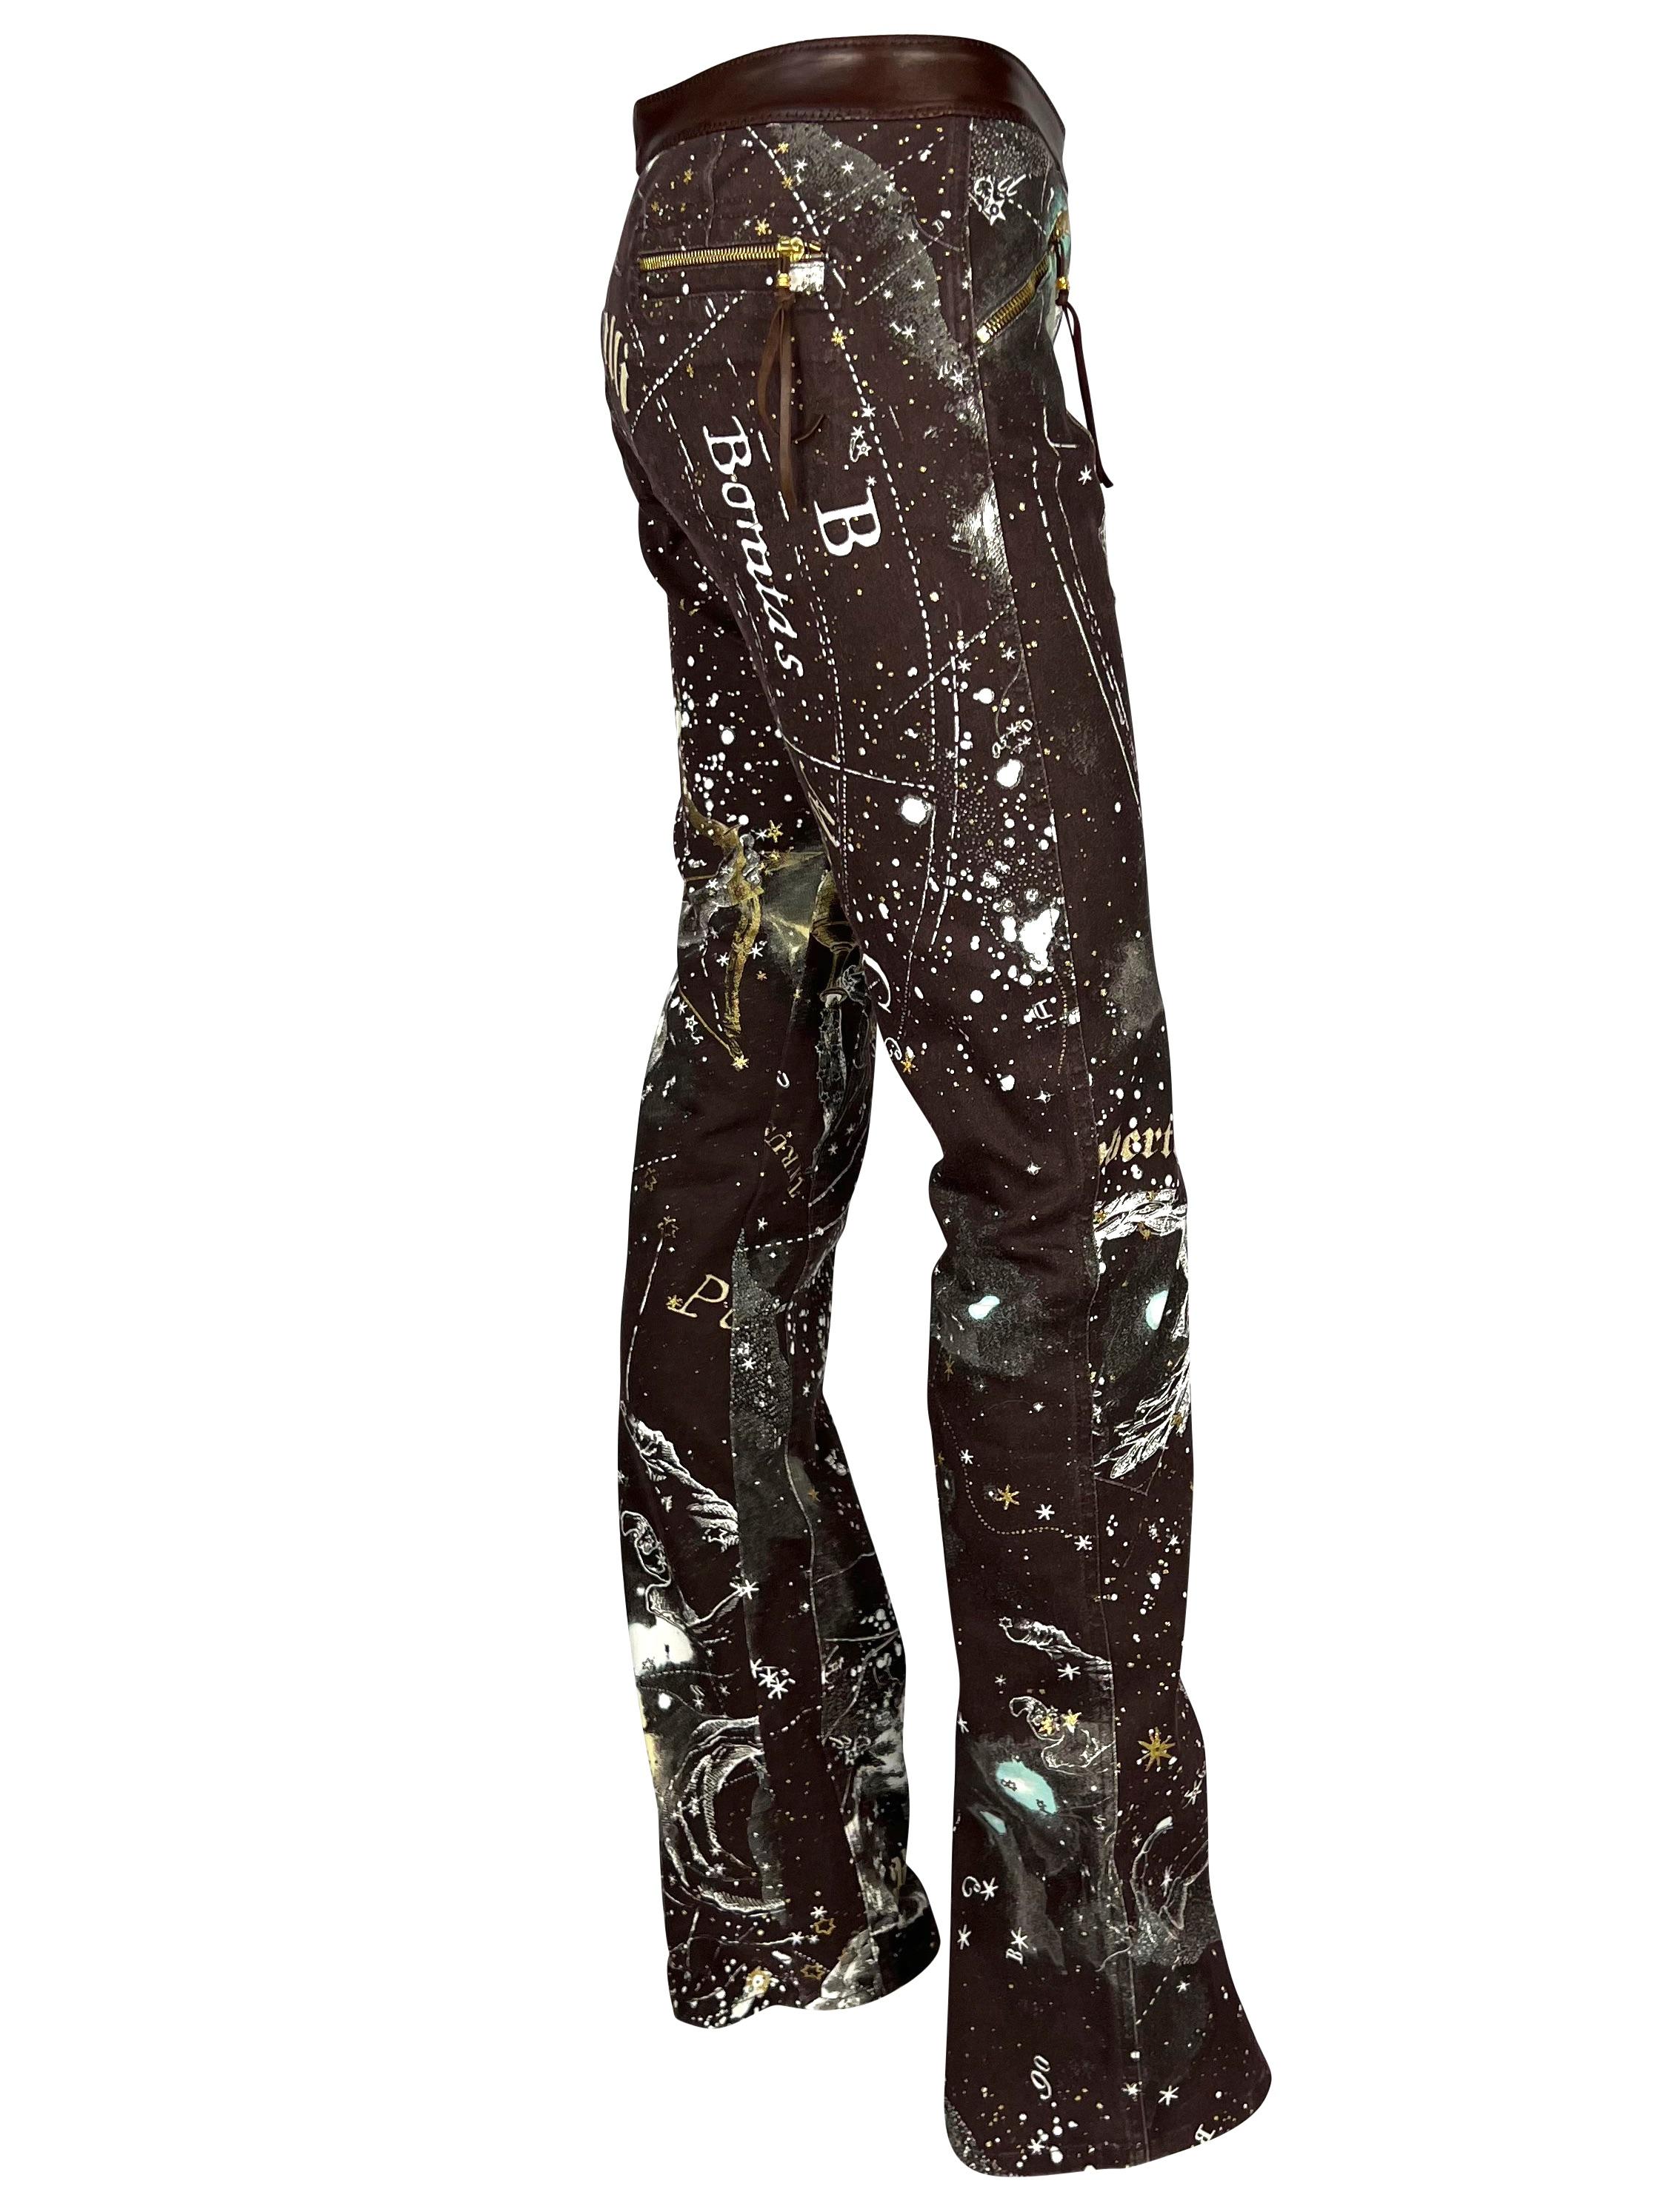 2003 Roberto Cavalli Astrology Logo Print Leather Trimmed Horoscope Jeans Pants In Excellent Condition In West Hollywood, CA